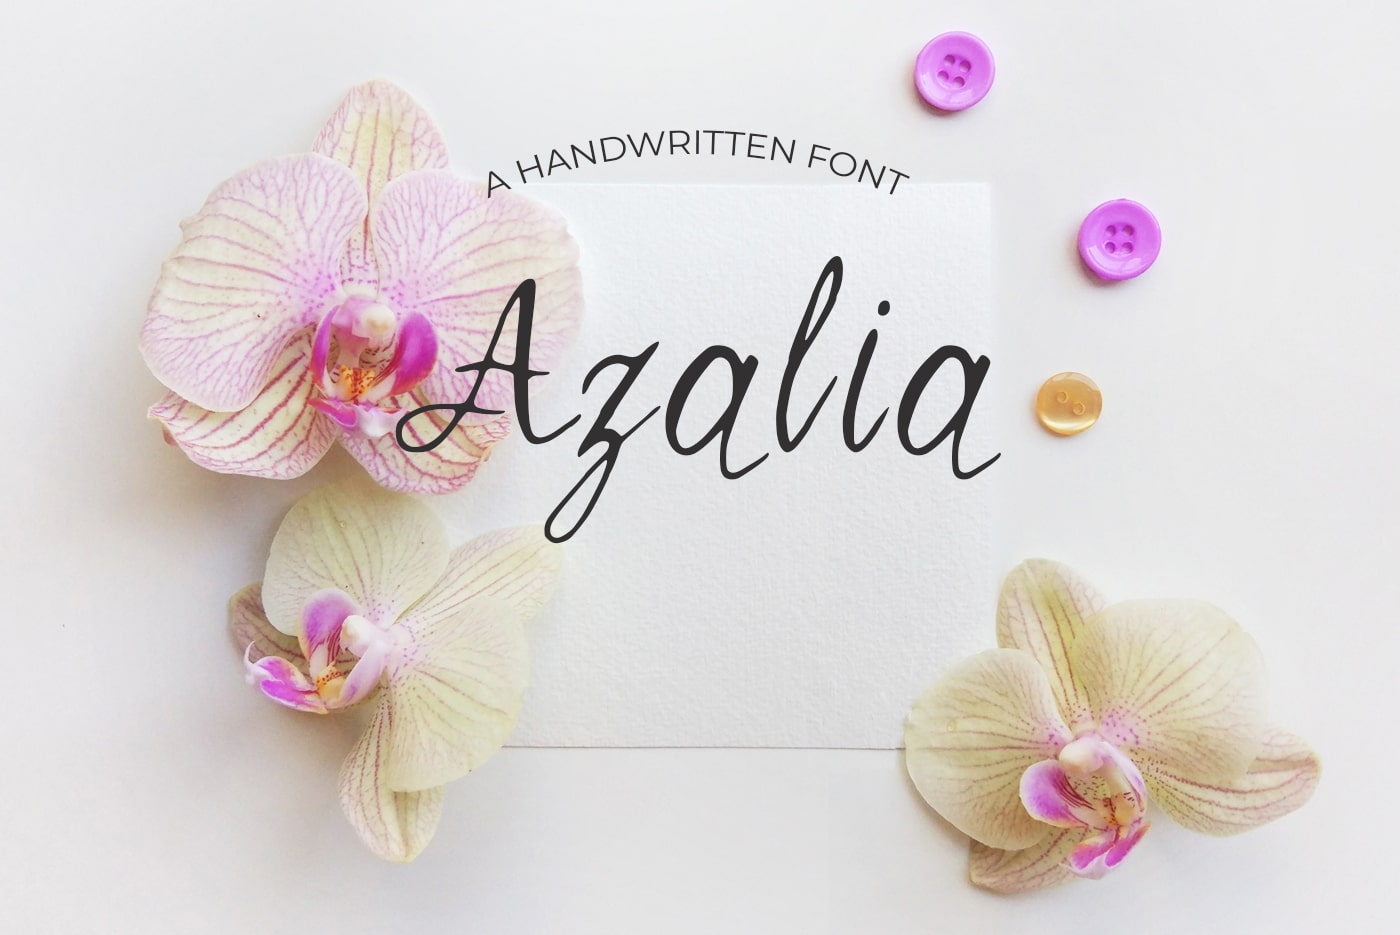 Calligraphy font on a tenderness background.